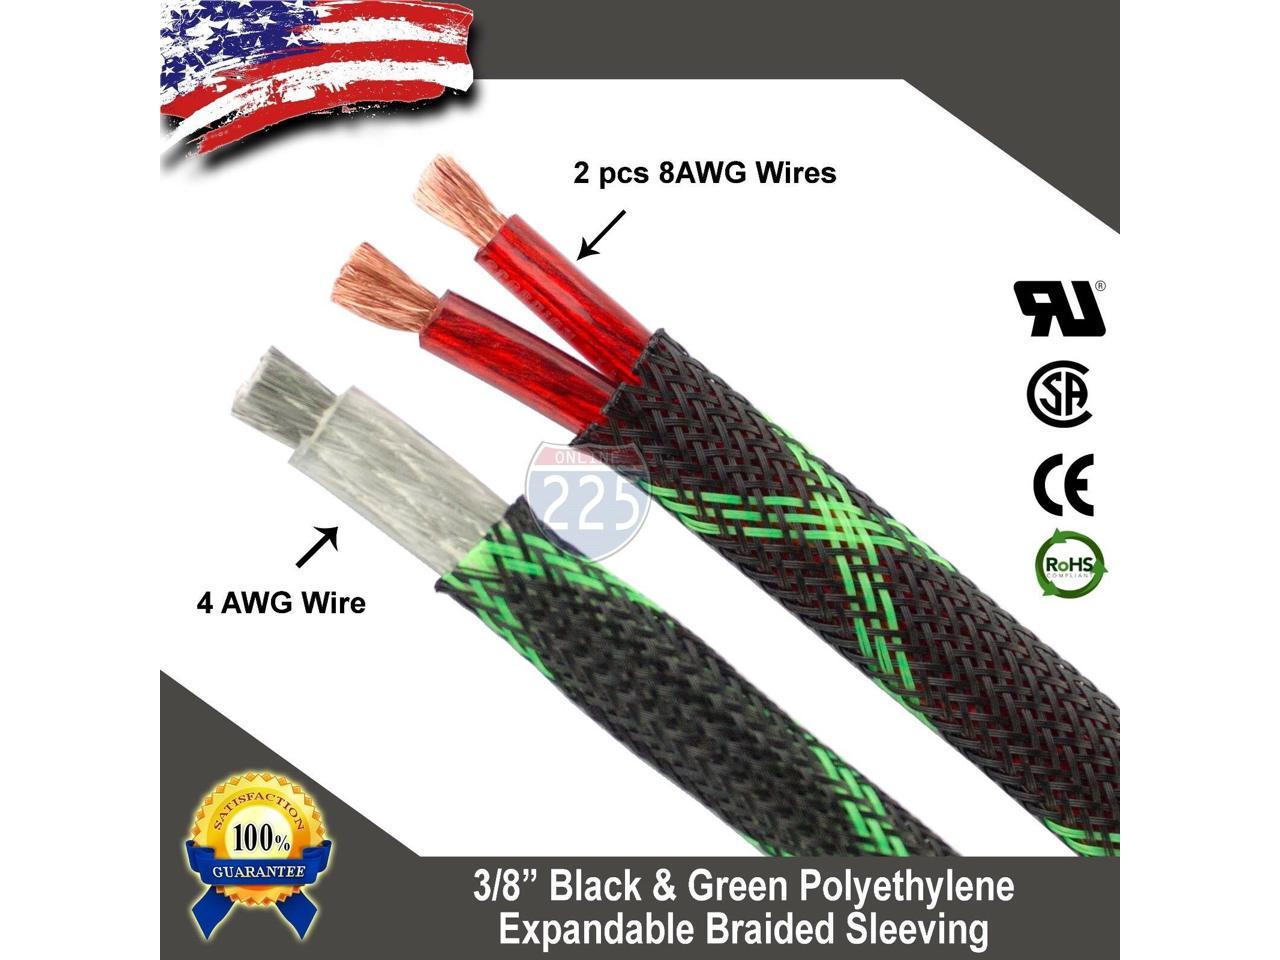 50 FT 3/8" Black Green Expandable Wire Sleeving Sheathing Braided Loom Tubing US 